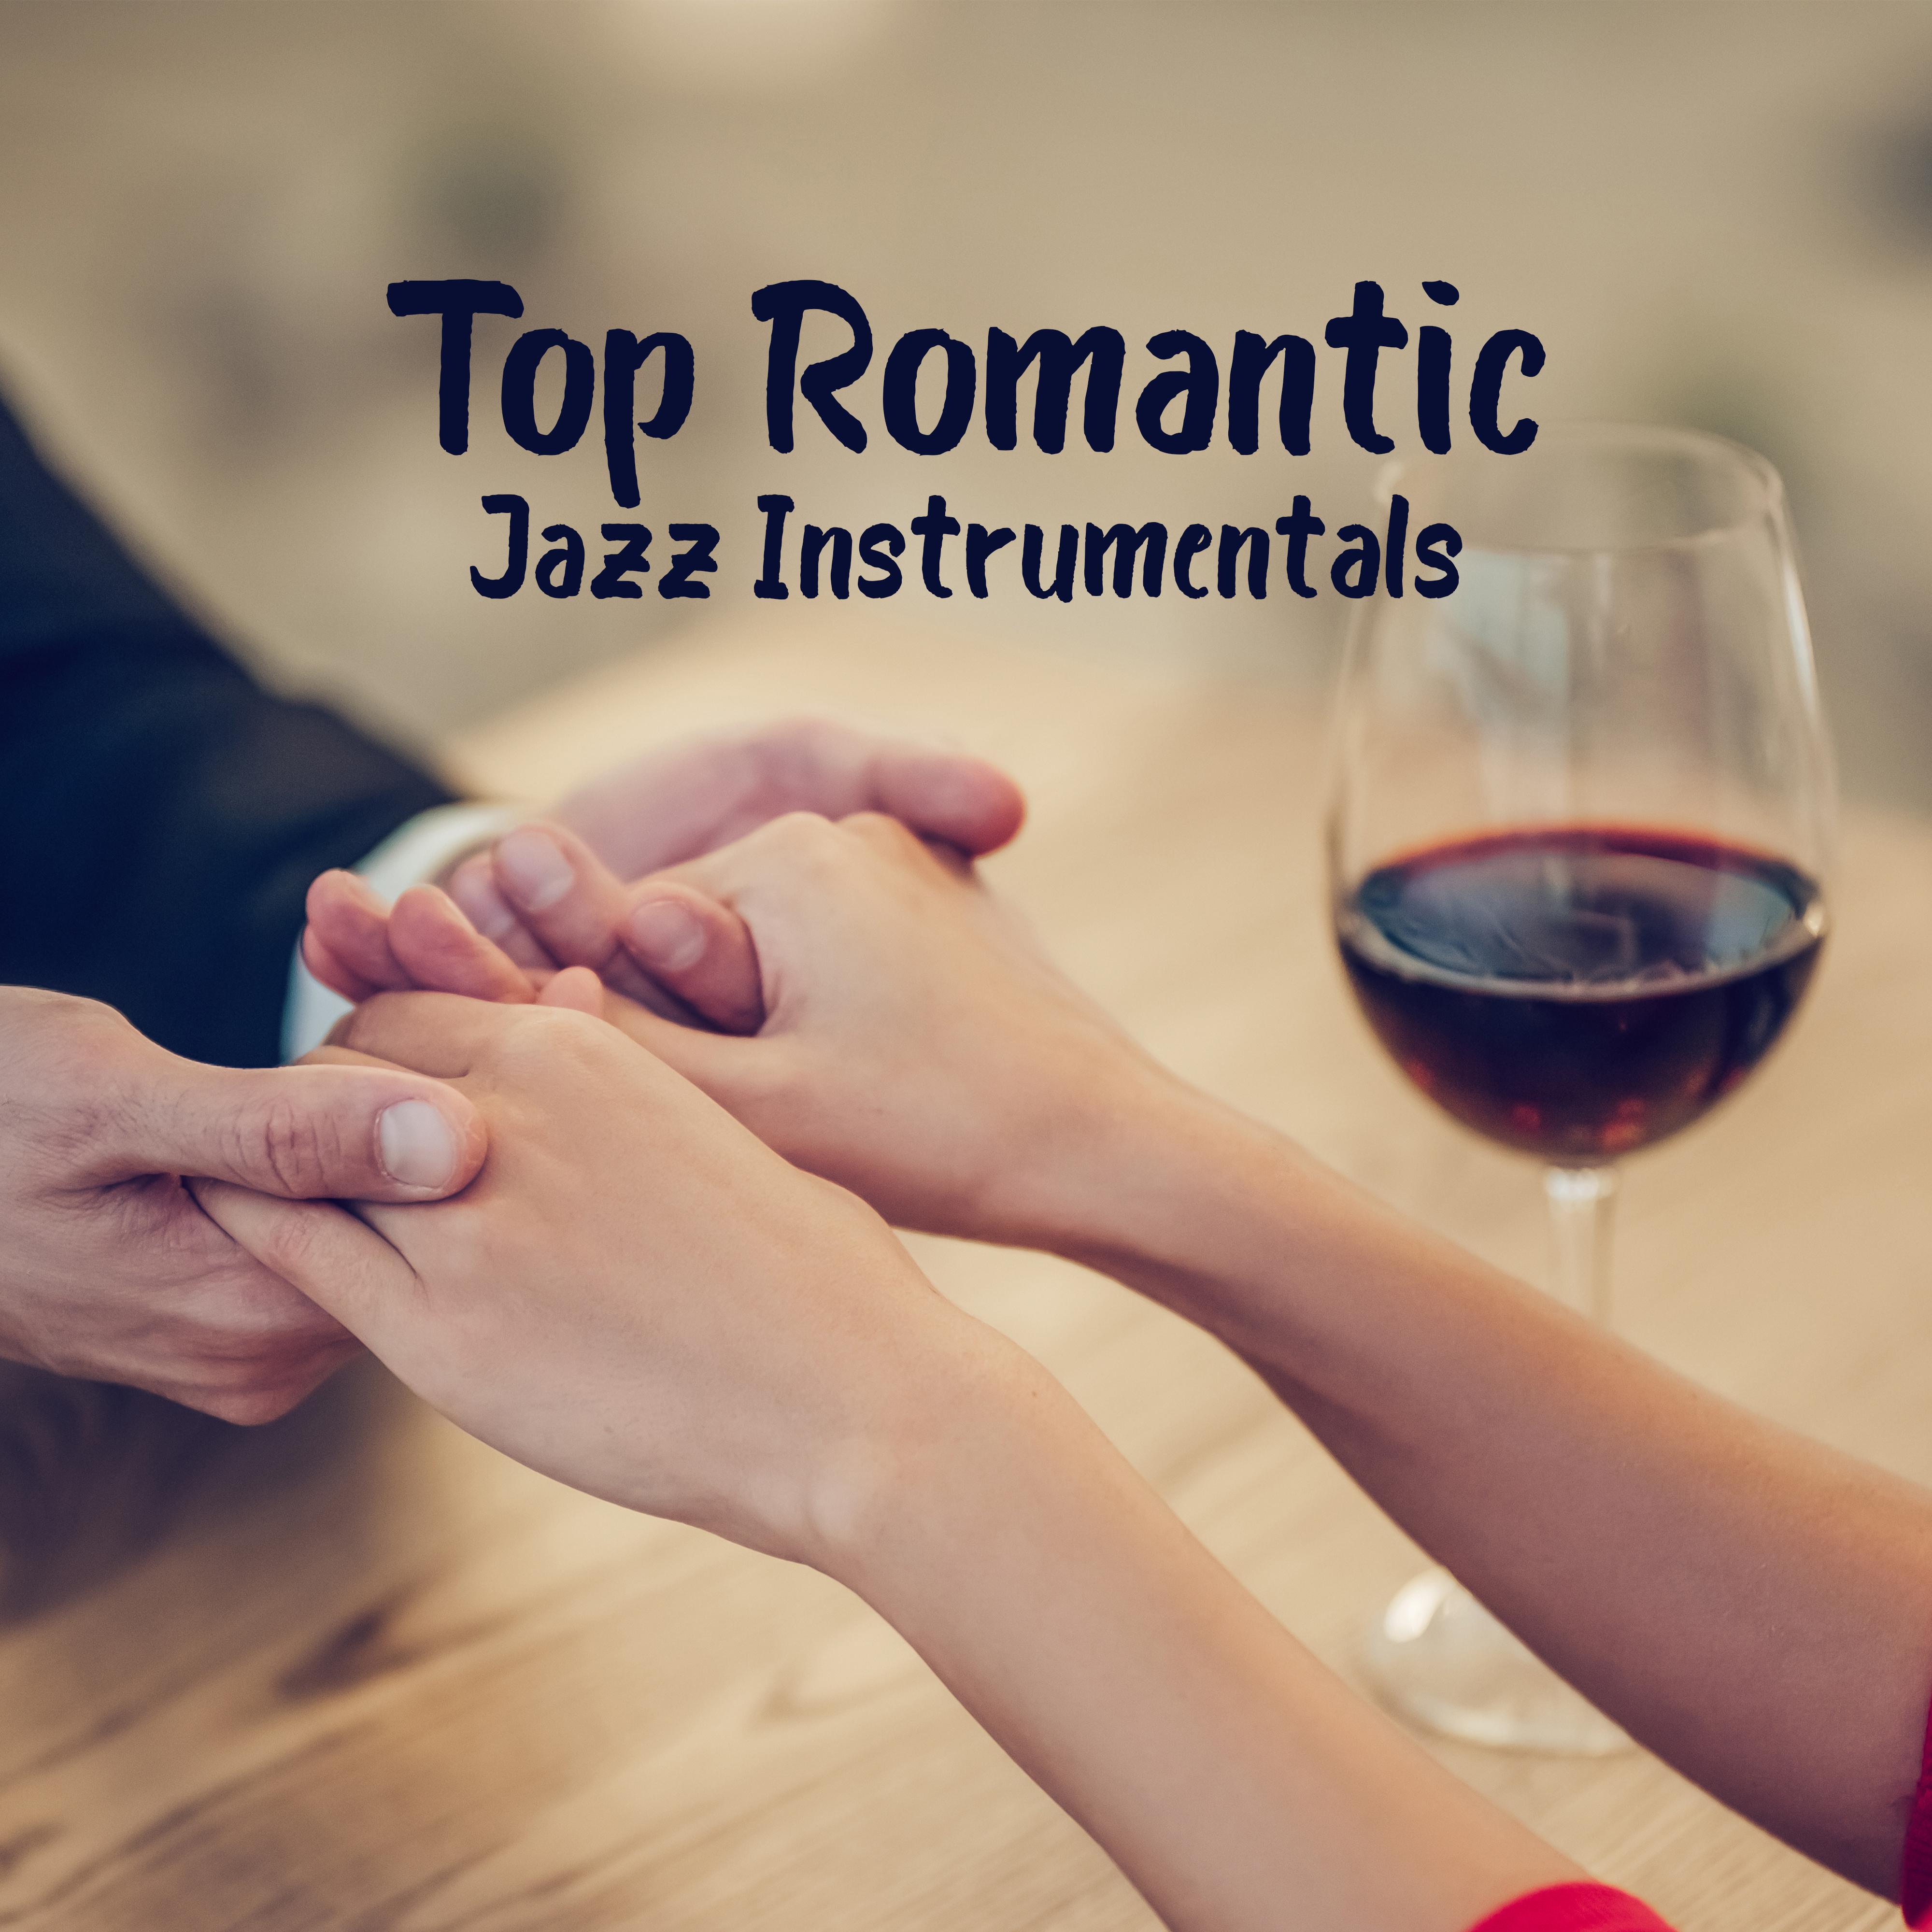 Top Romantic Jazz Instrumentals: Smooth Jazz Music for Couples, Lots of Love, Sweet Happy Time Spending Together, Romantic Dinner Background Songs